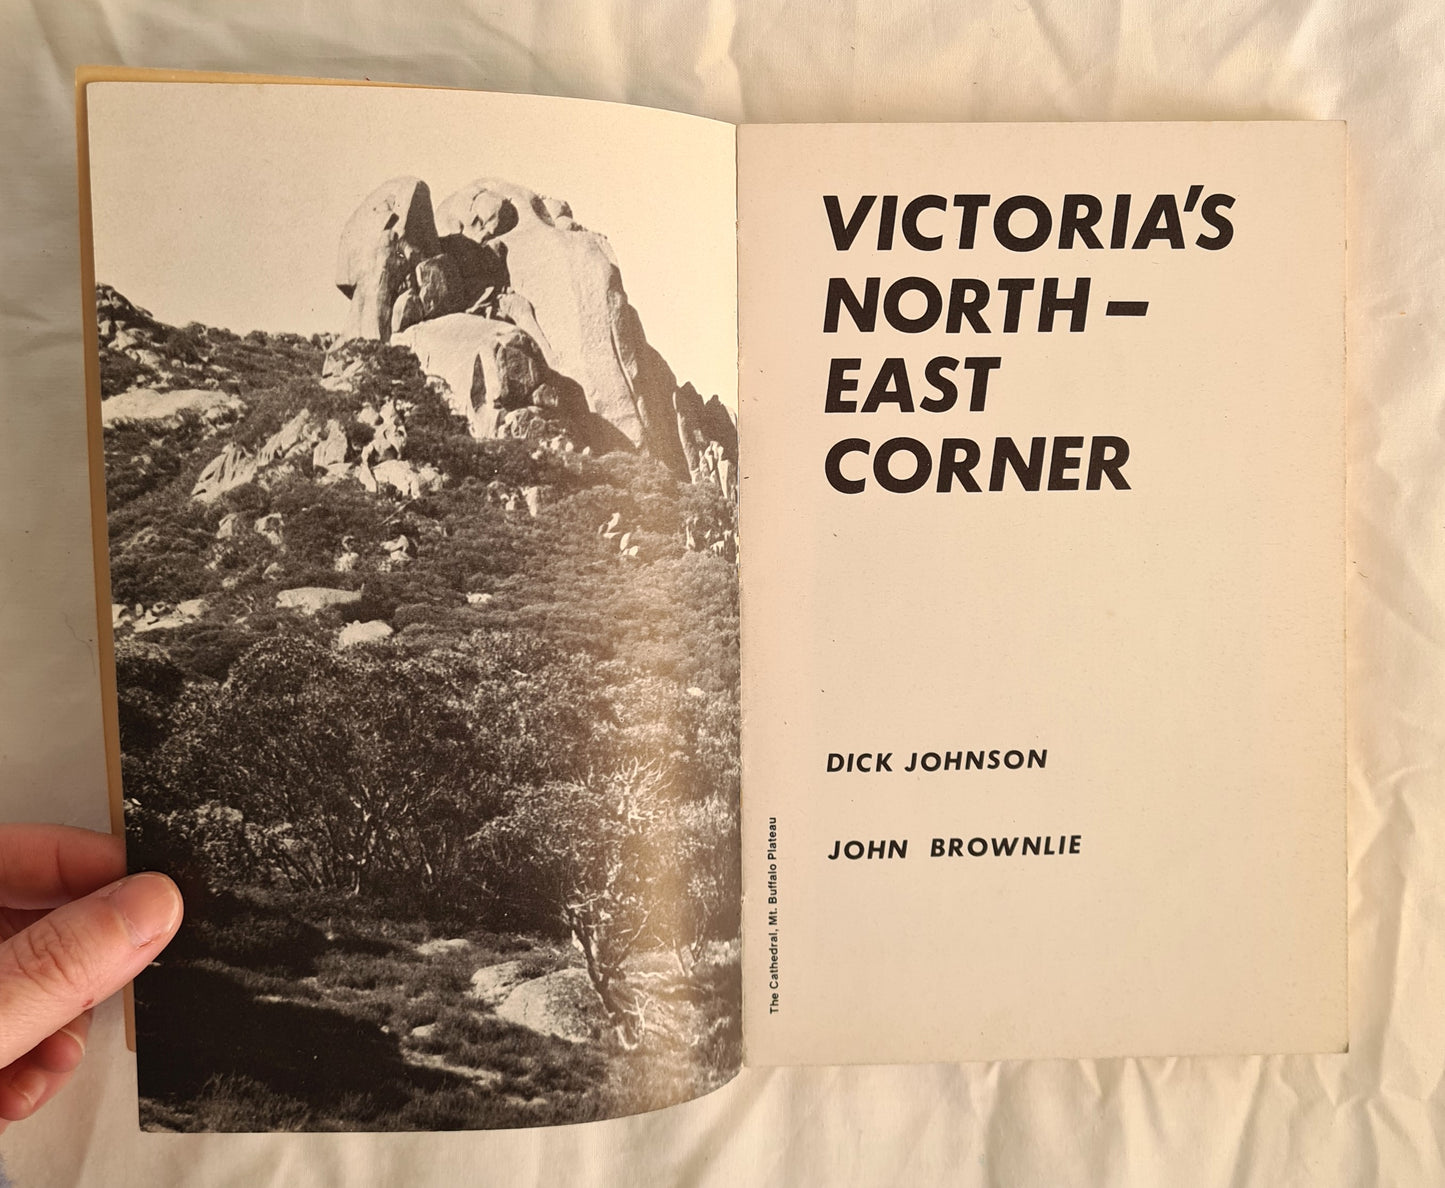 Victoria’s North-East Corner by Dick Johnson and John Brownlie